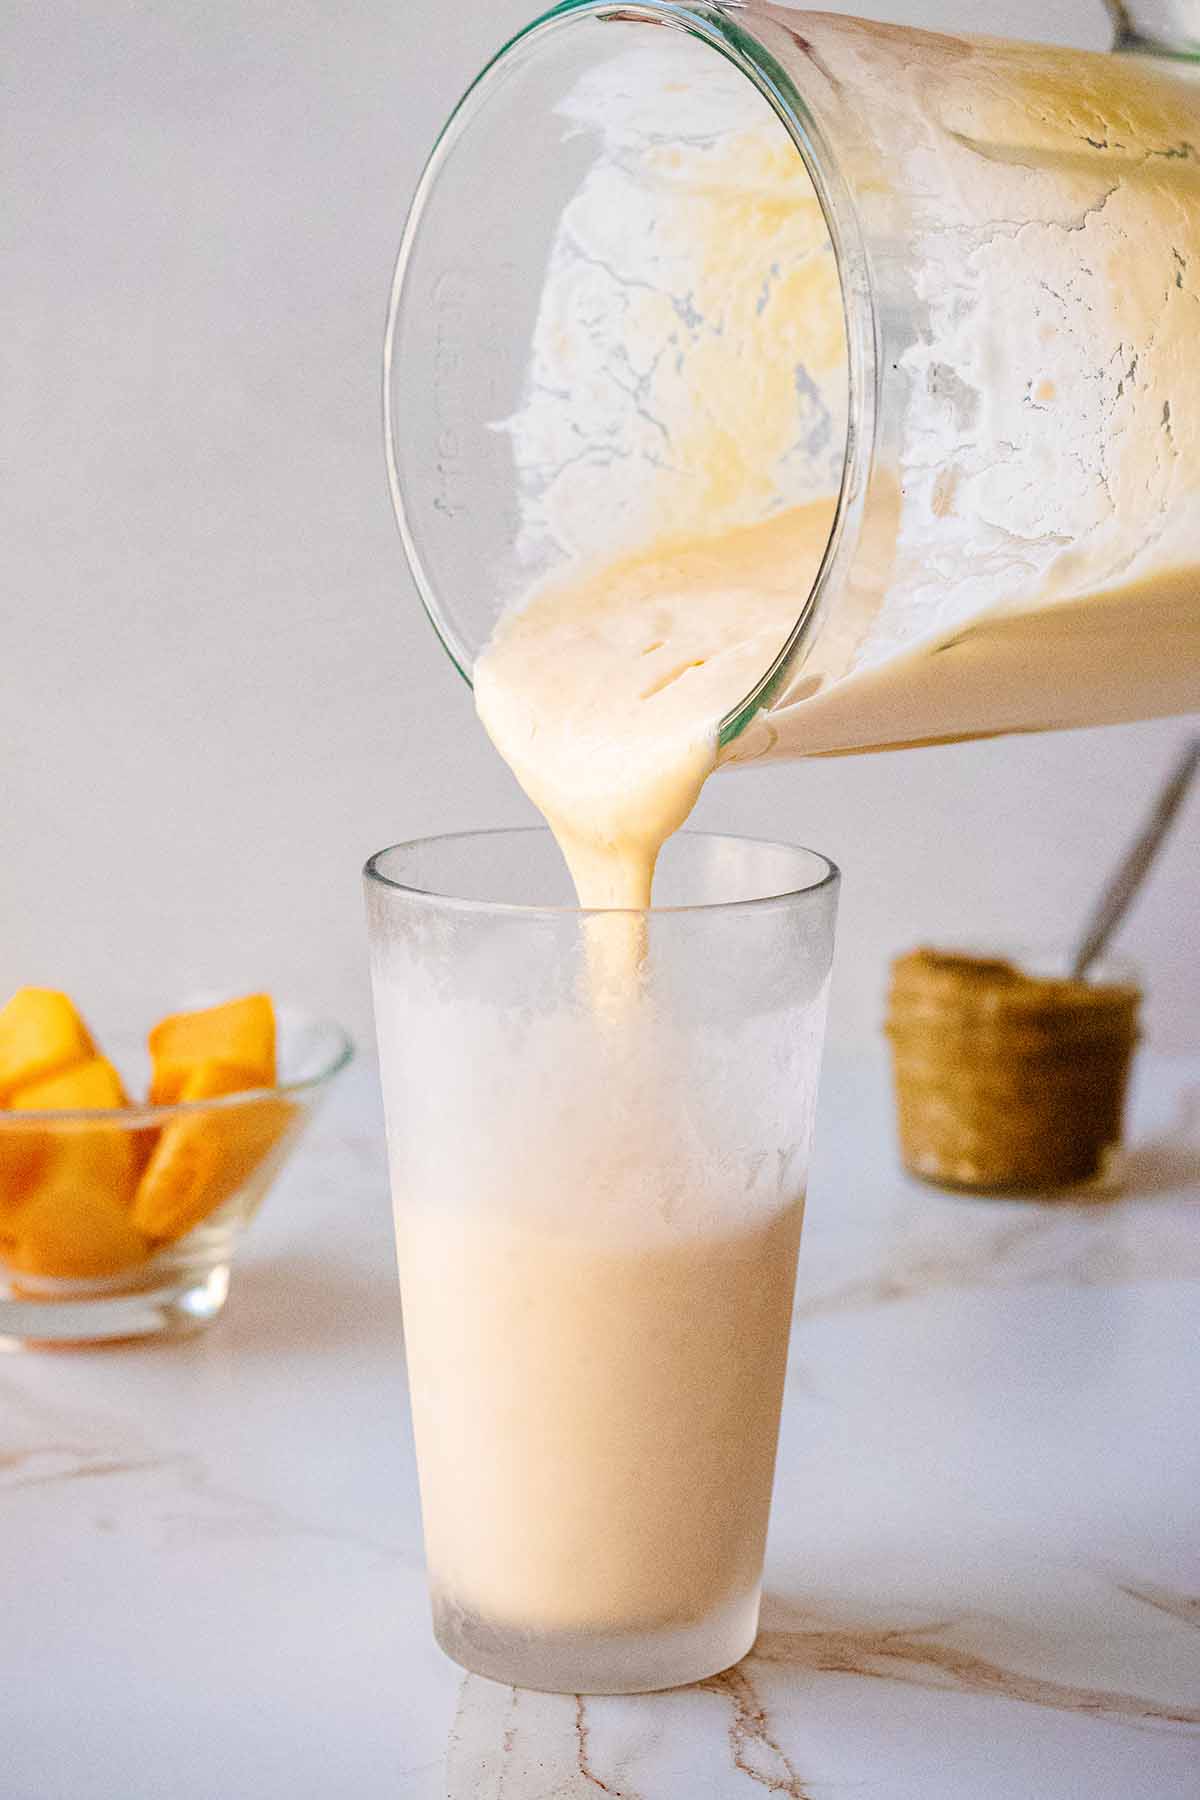 Smoothie being poured into a chilled glass